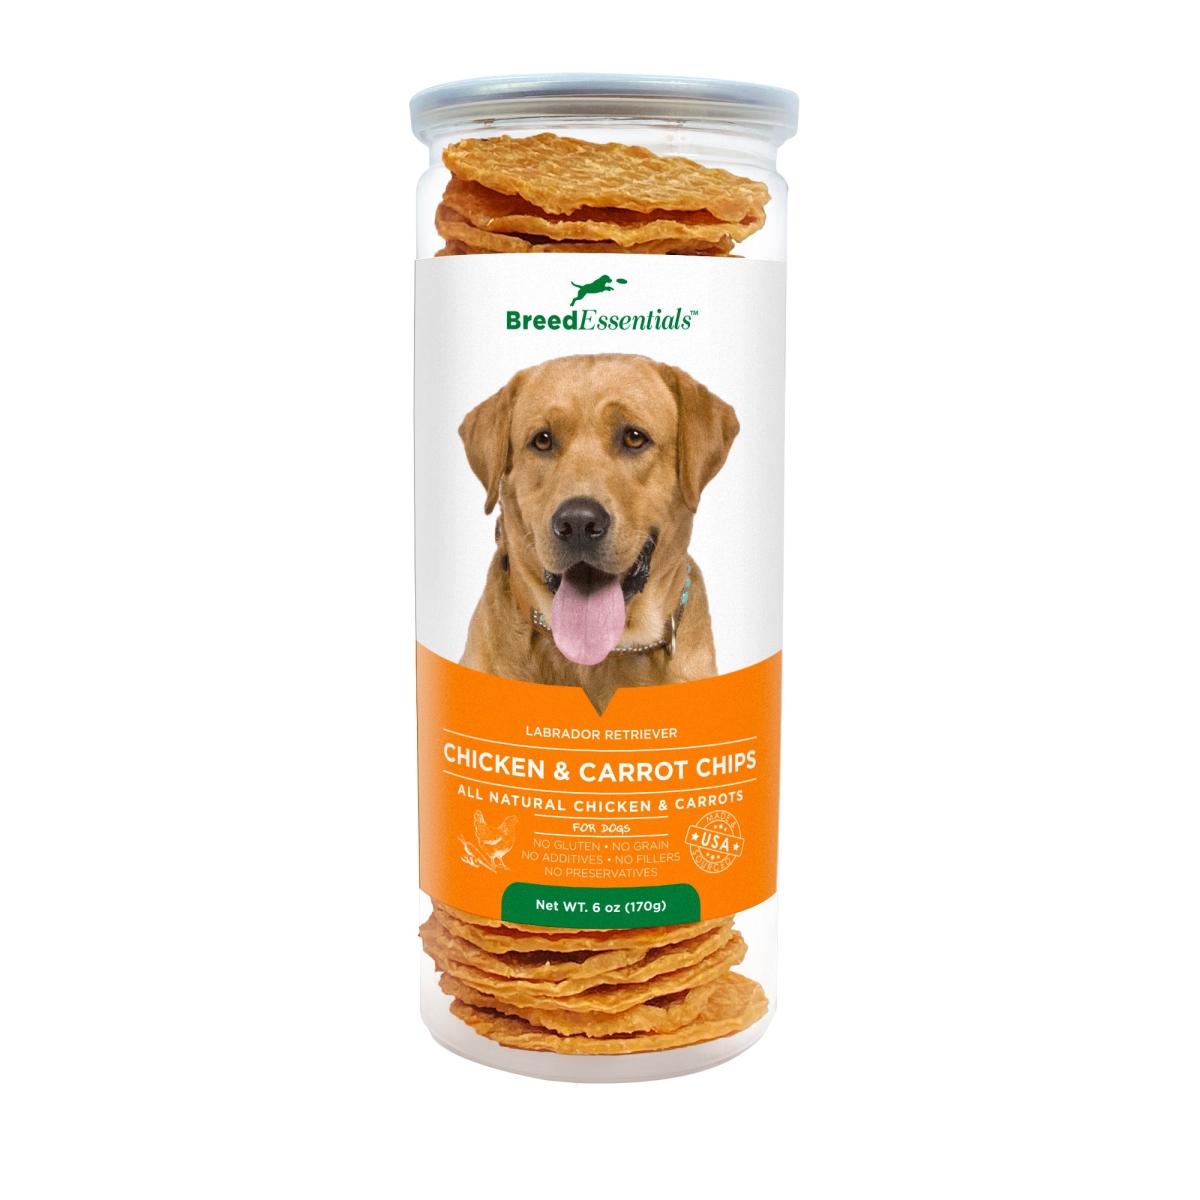 Picture of Breed Essentials 197247000037 6 oz Chicken & Carrot Chips - Labrador Retriever